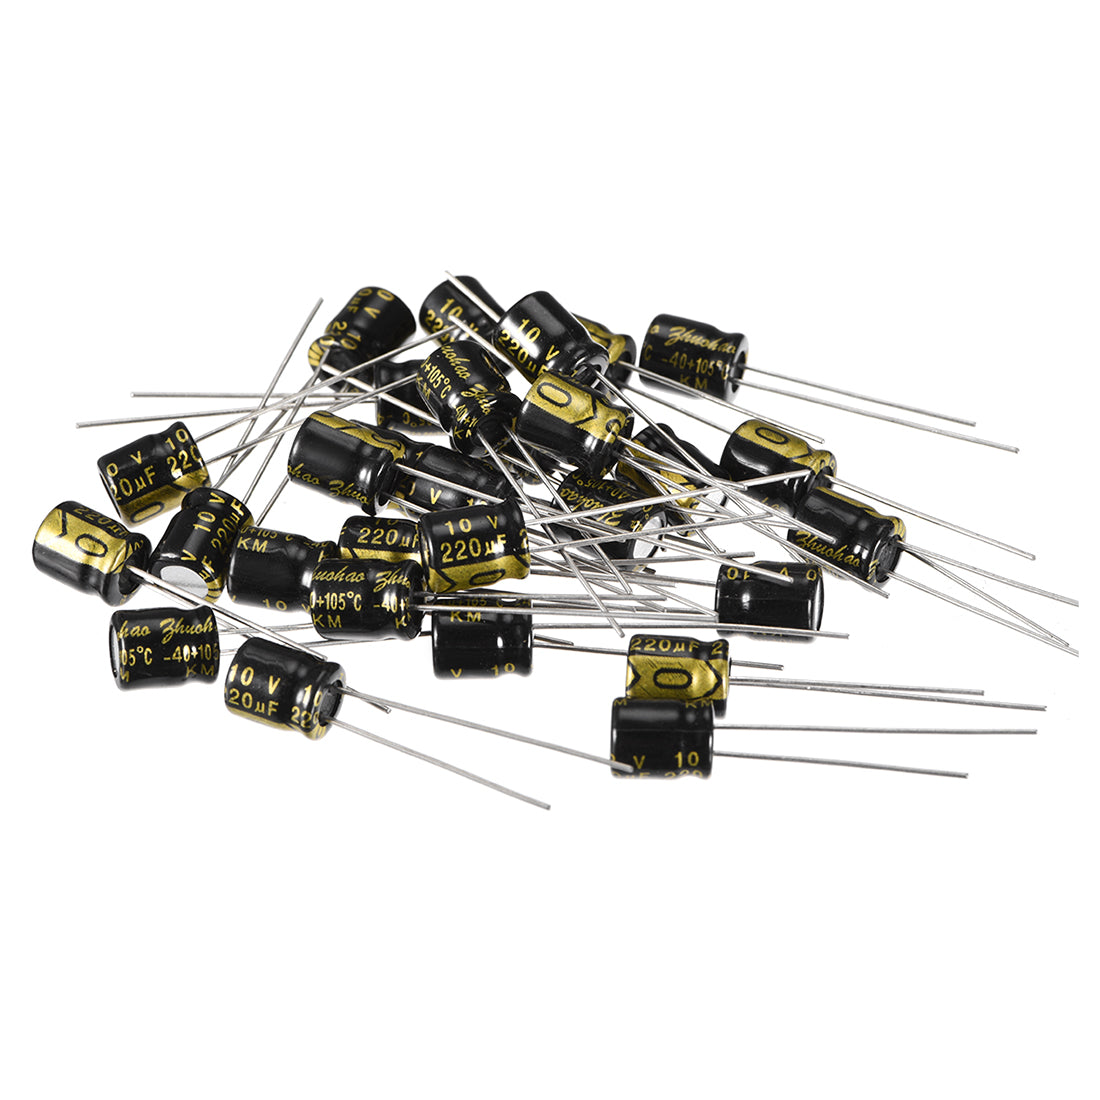 uxcell Uxcell Aluminum Radial Electrolytic Capacitor with 220uF 10V 105 Celsius Life 2000H 6 x 7 mm Black 30pcs